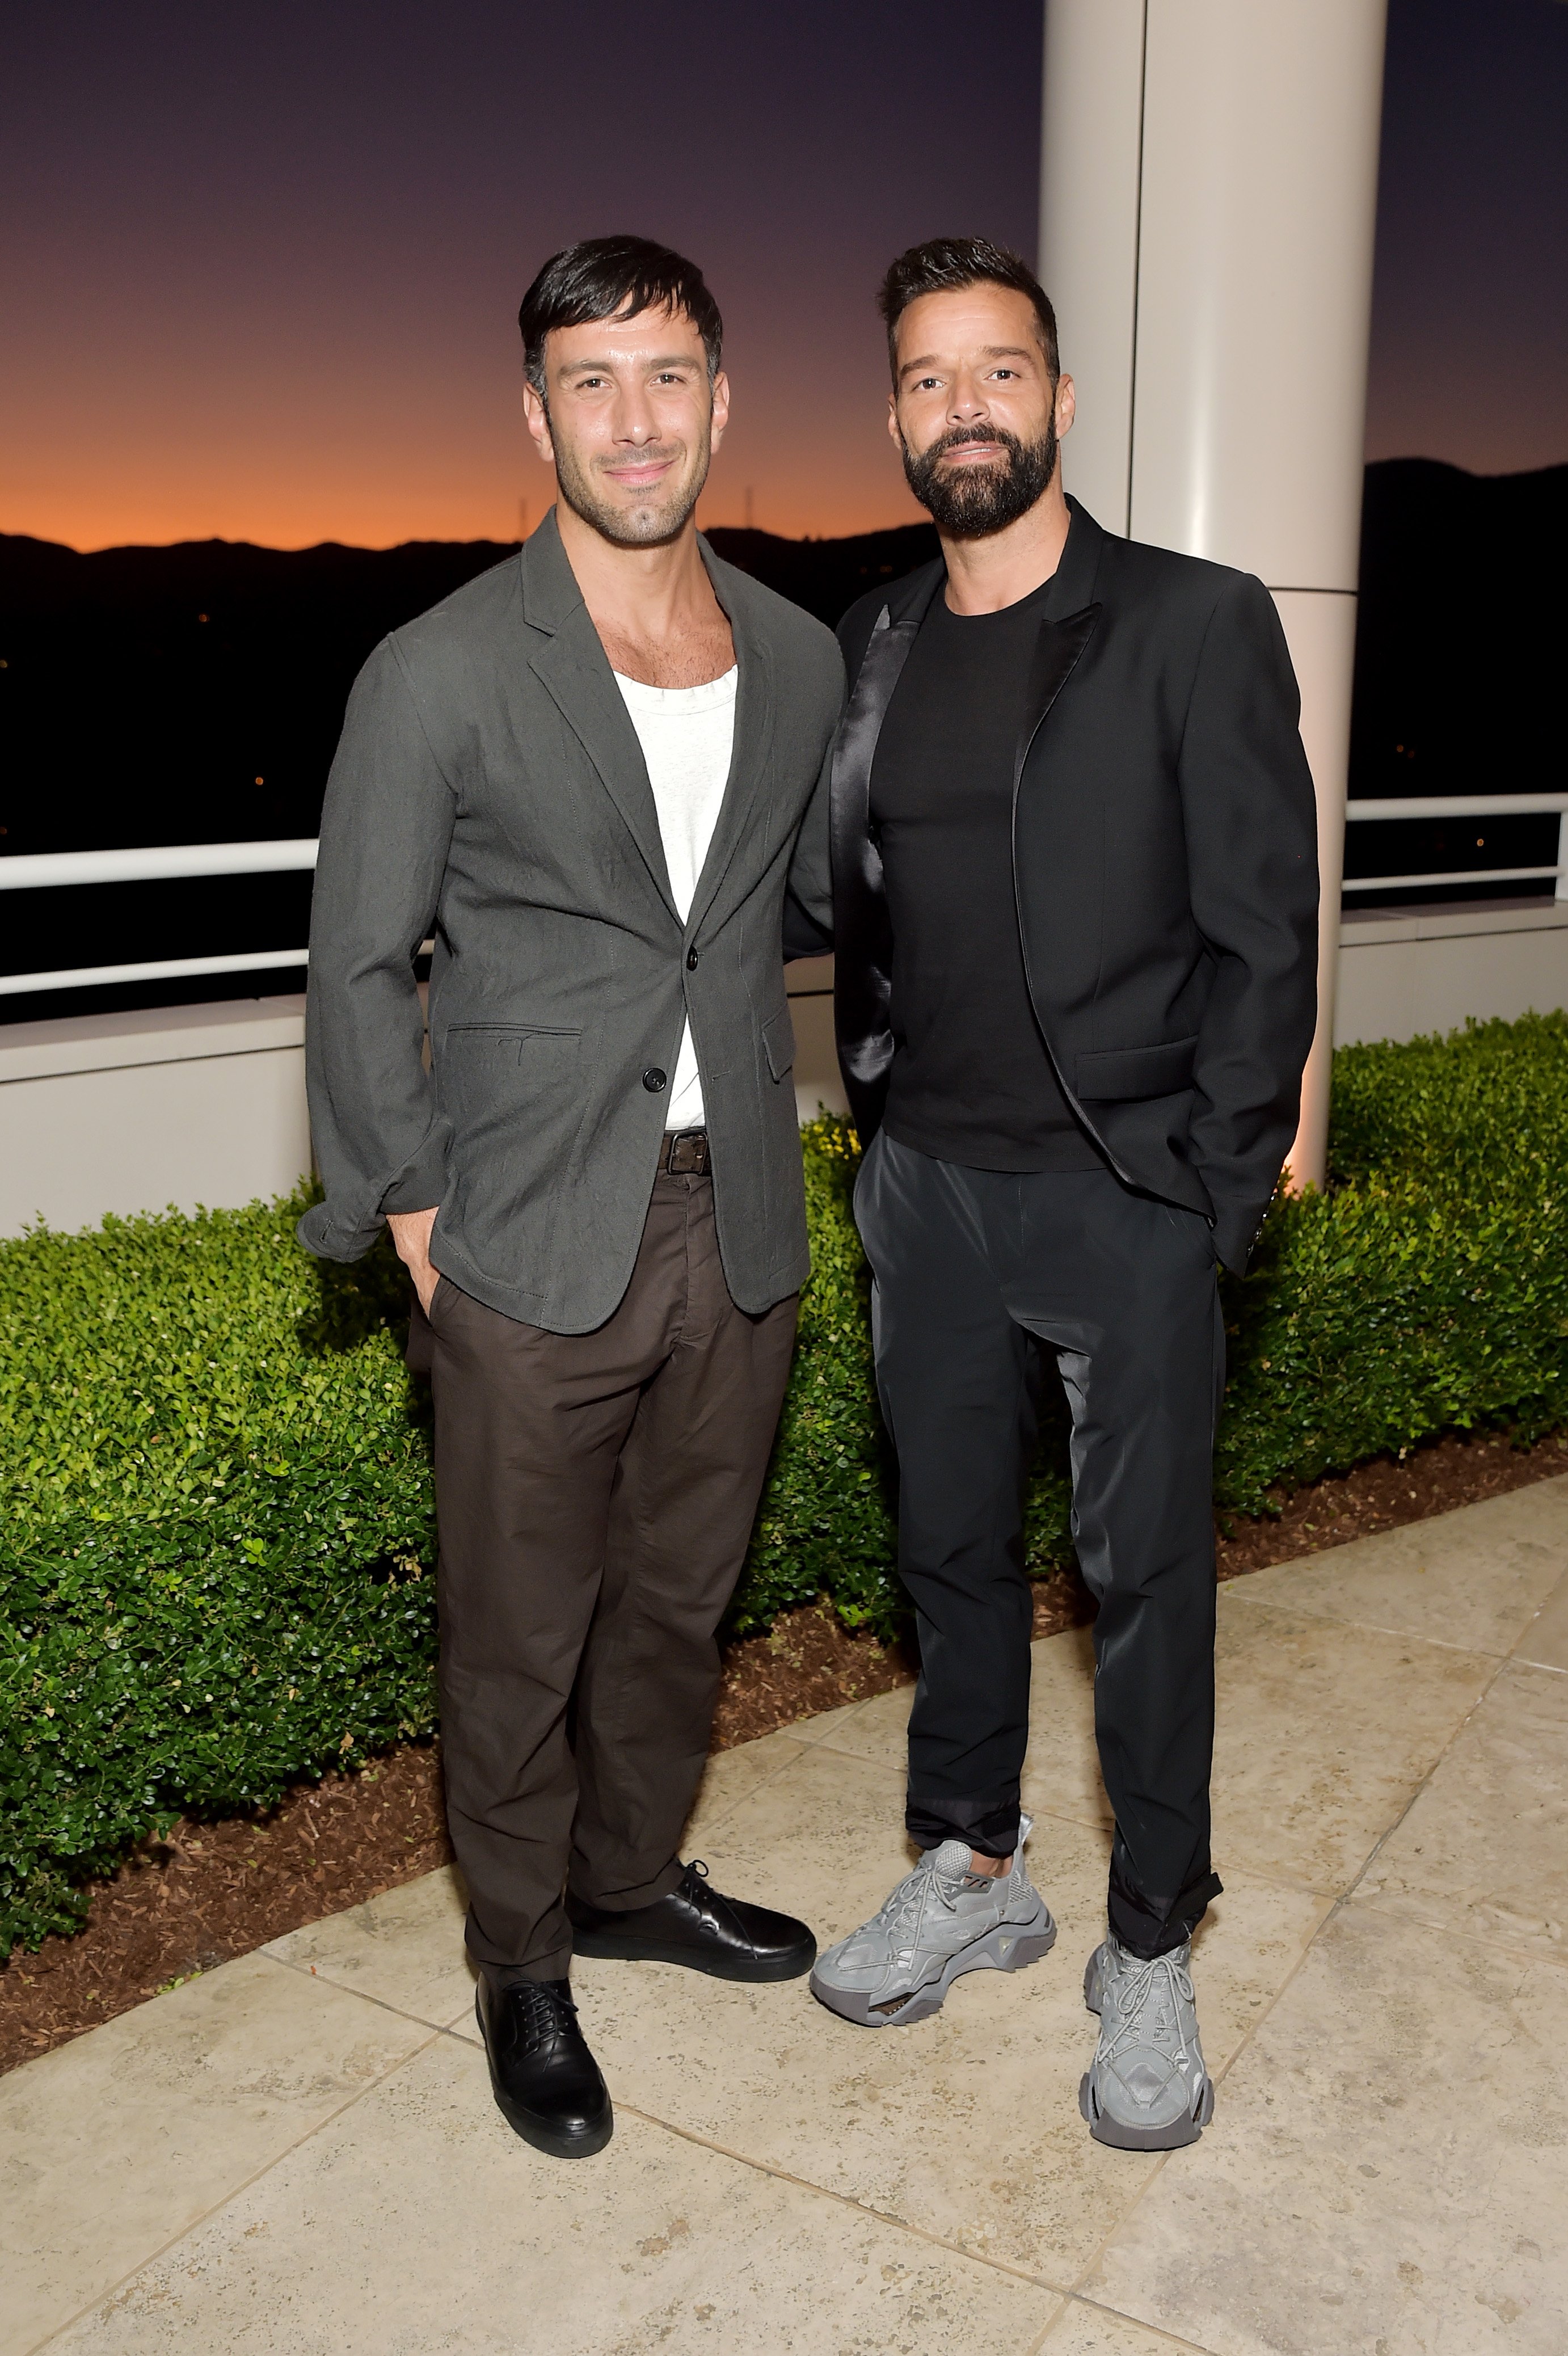 Jwan Yosef and Ricky Martin attend The J. Paul Getty Medal Dinner on September 16, 2019. | Photo: Getty Images